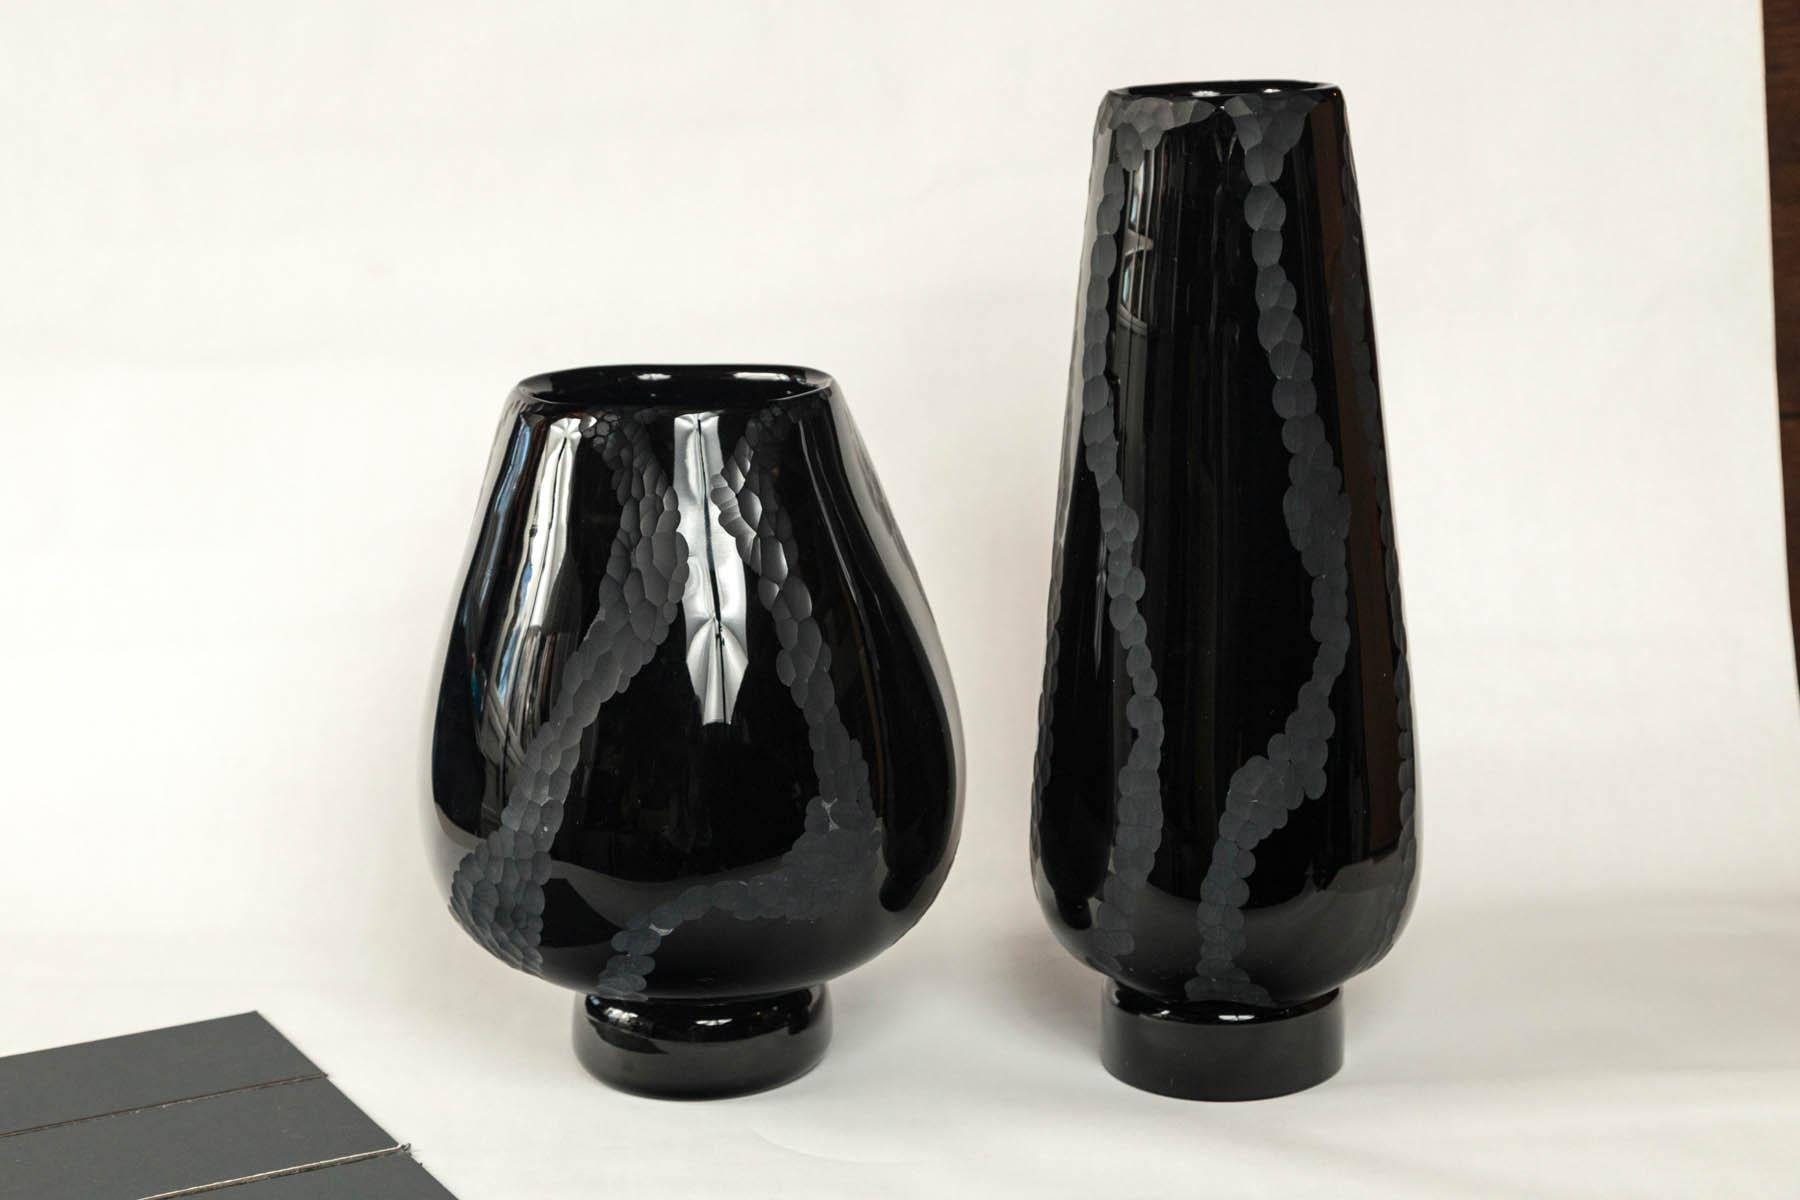  Murano black glass vases, Pauly, Italy. Striking opaque black glass with etched design. Pauly & Co. glassworks was founded in Murano, Italy in 1902, and ceased operation in 2016. Signed: Nostos 2007. Sold individually.